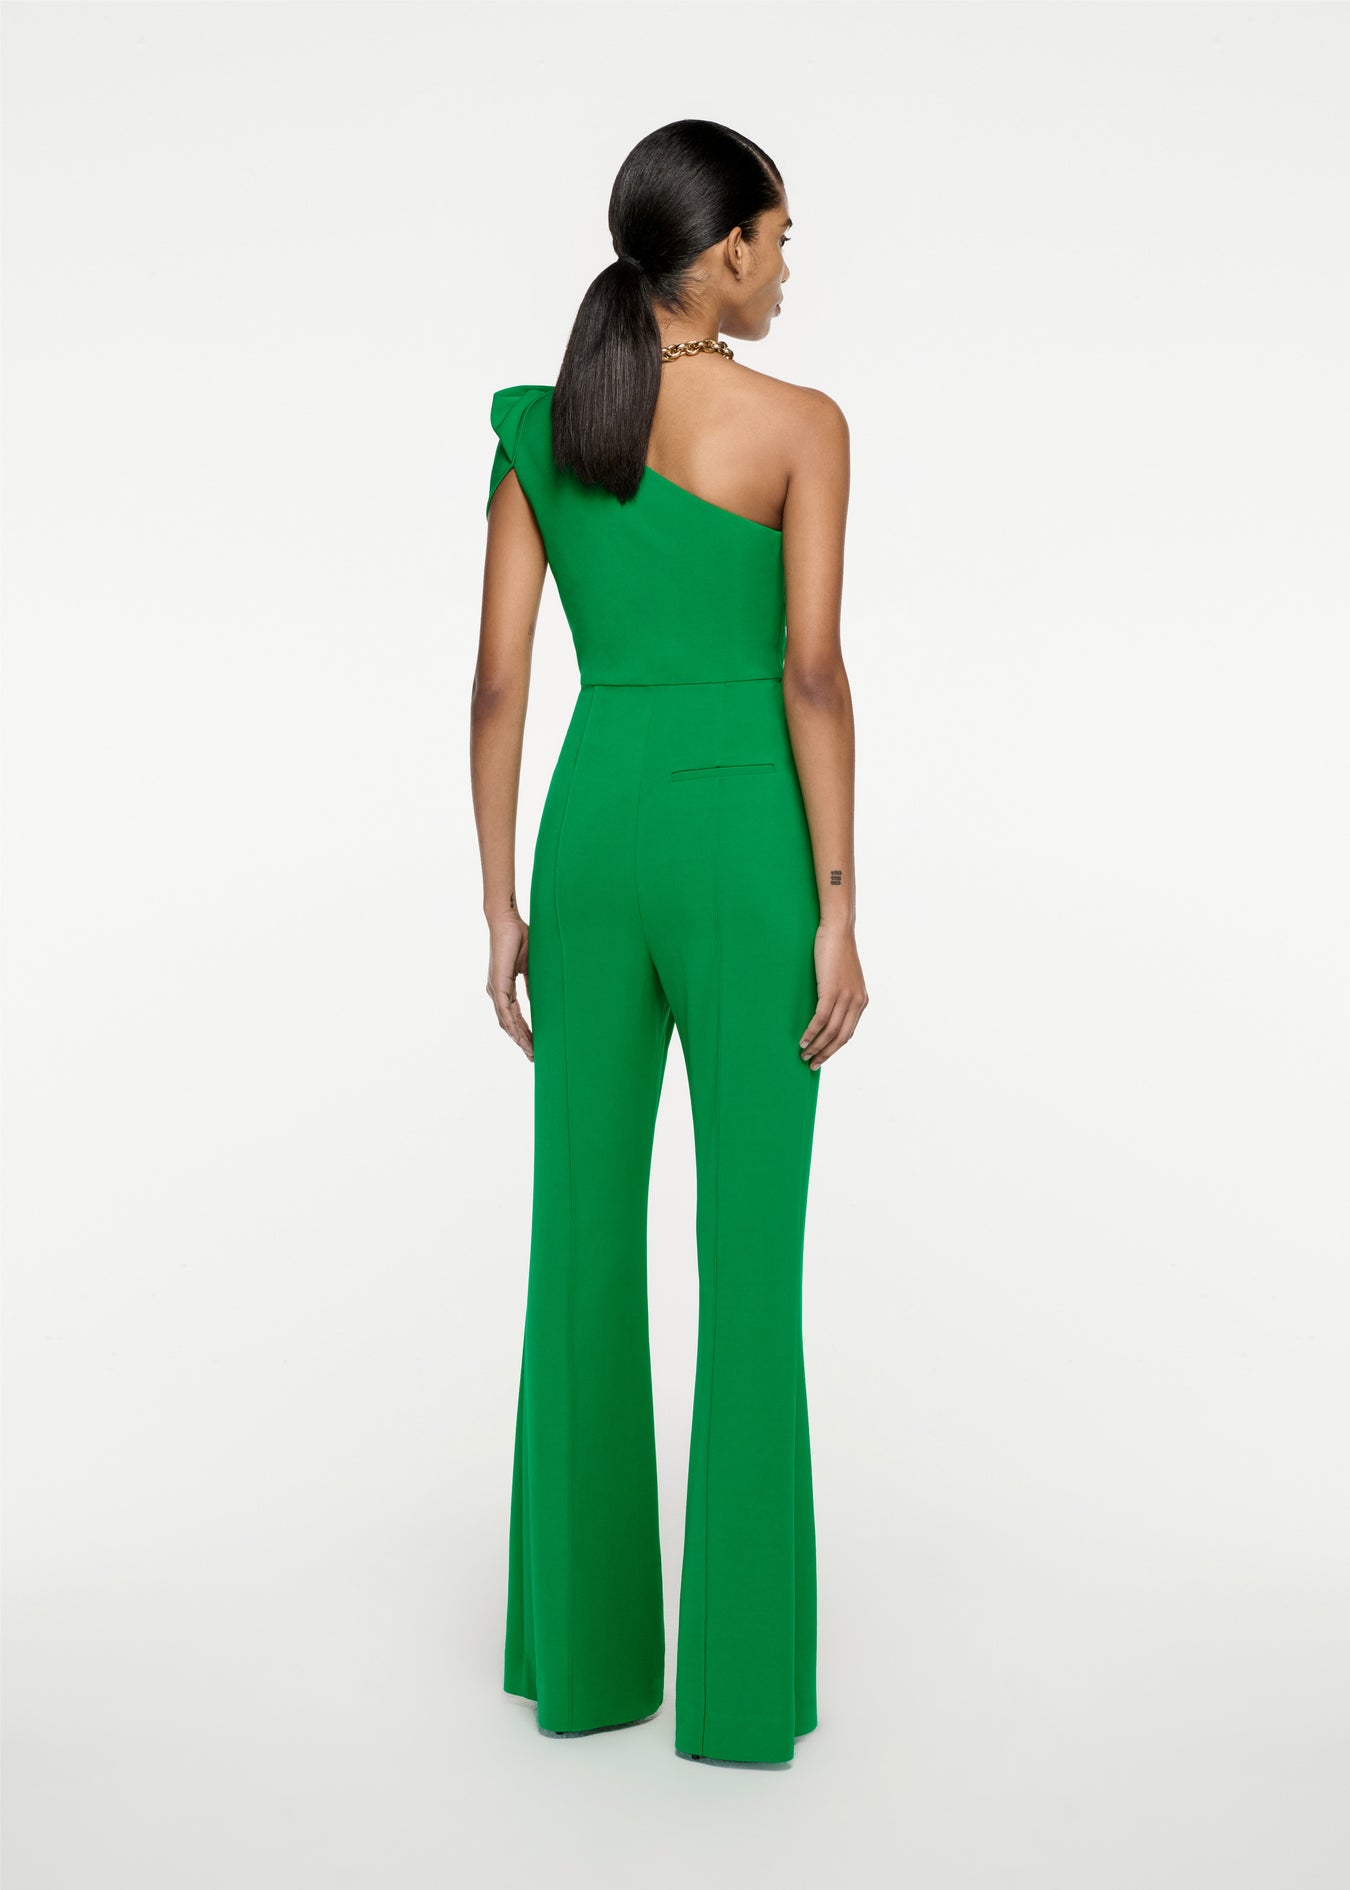 The back of a woman wearing the Asymmetric Stretch Cady Jumpsuit in Green